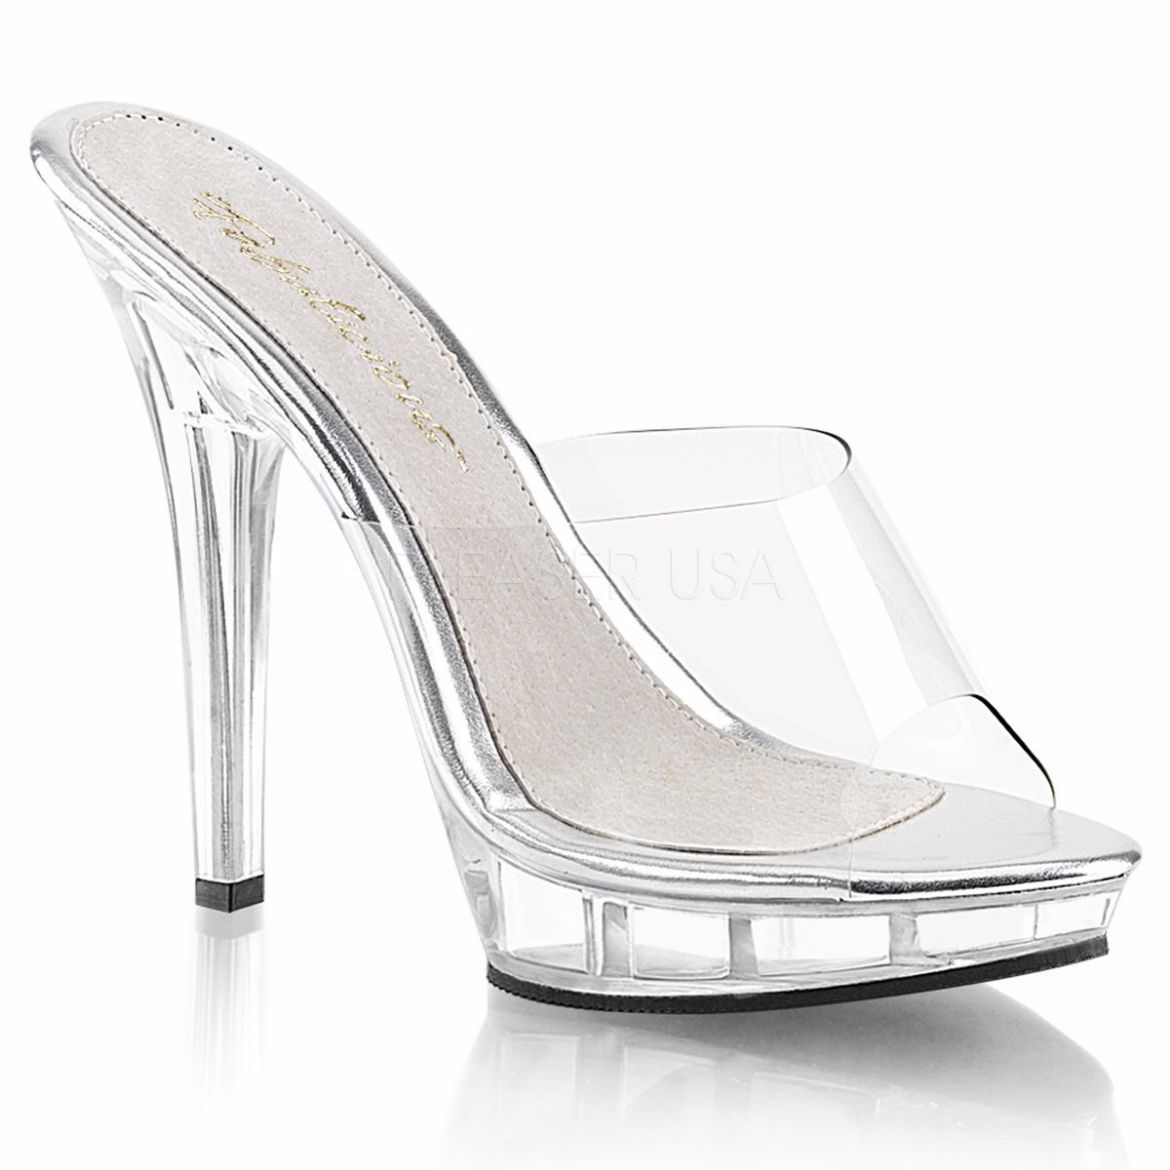 Product image of Fabulicious Lip-101 Clear/Clear, 5 inch (12.7 cm) Heel, 3/4 inch (1.9 cm) Platform Slide Mule Shoes